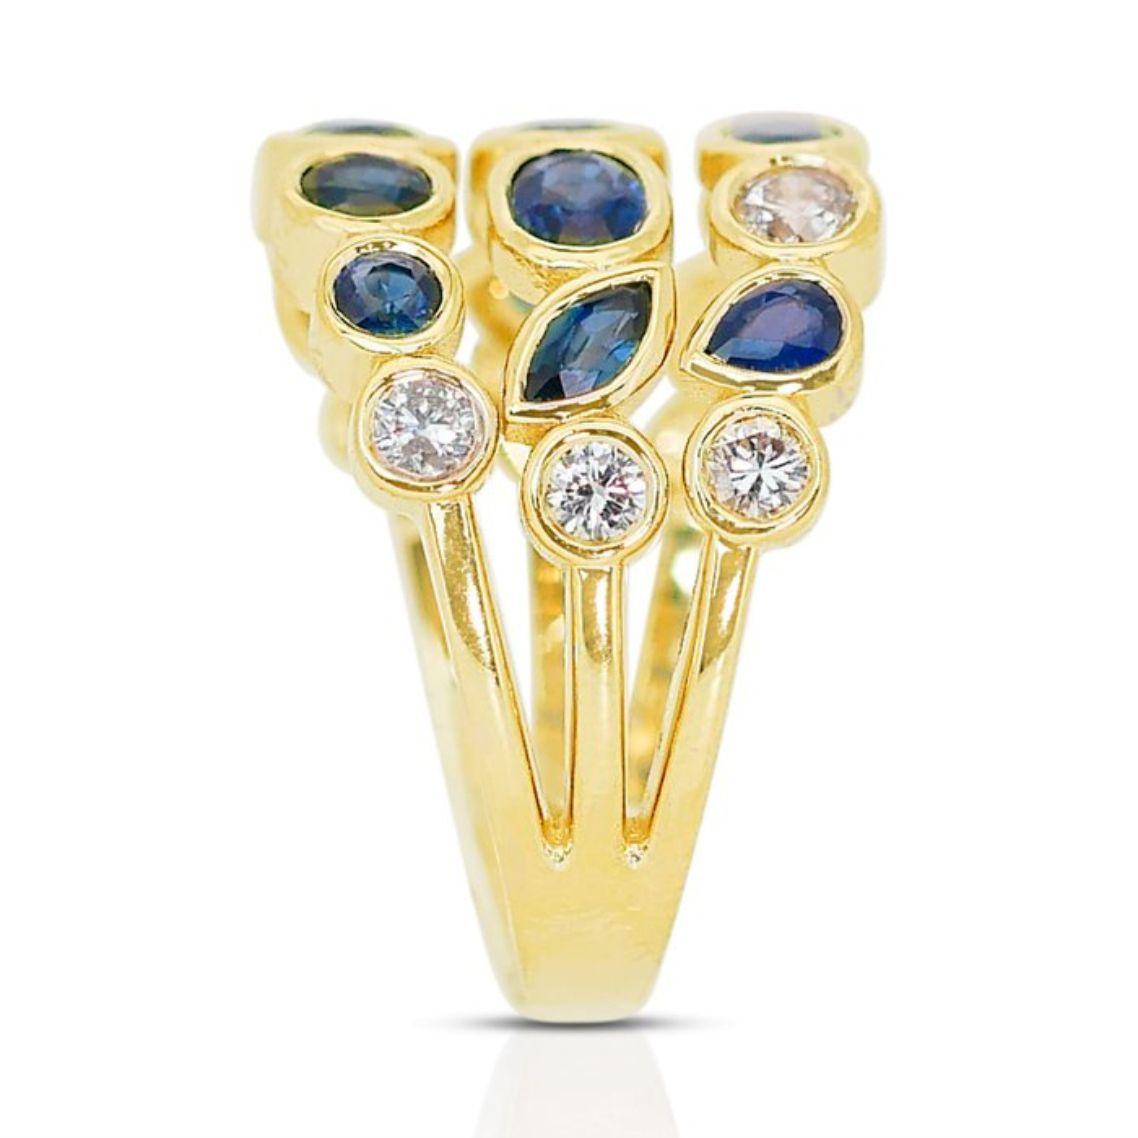 Women's Captivating 3.37ct Diamond and Sapphire Ring in 14K Yellow Gold